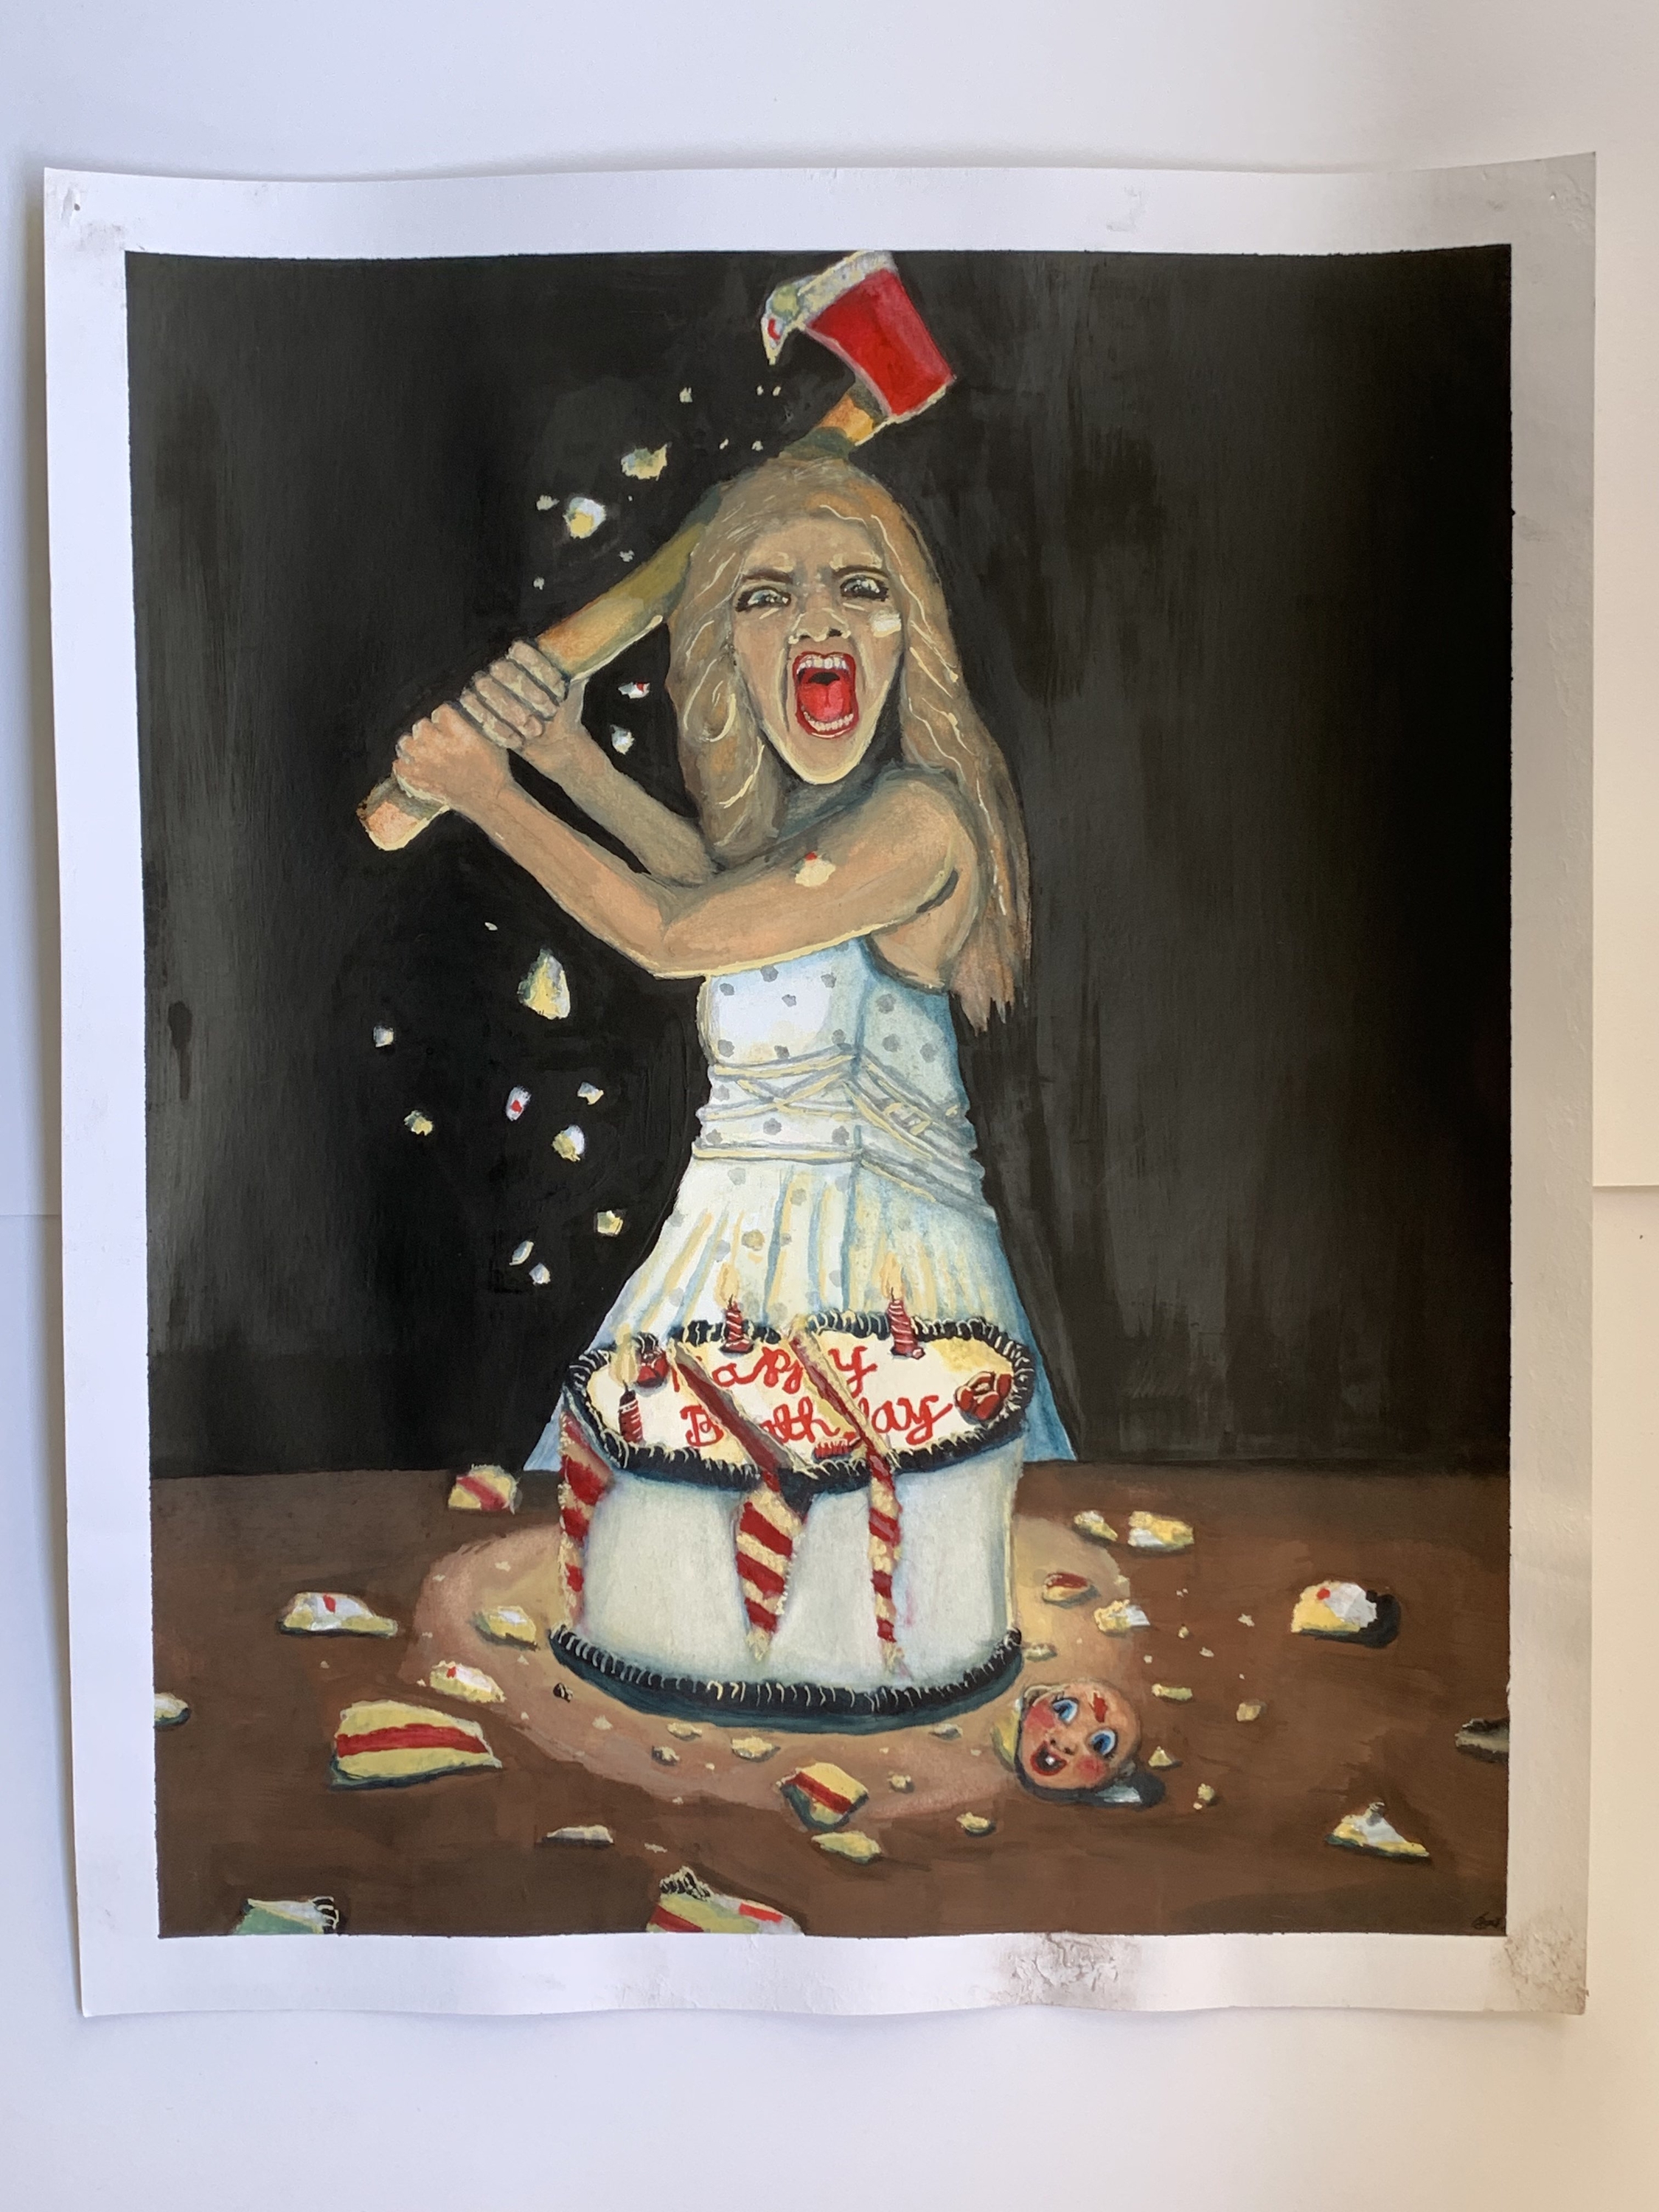 A gouache painting featuring a young woman in a white dress attacking a birthday cake with an axe. It is an illustration for the movie, Happy Death Day. The detail on the cake looks delicious, but the cake is a lie, because it was sent by the killer, Babyface, whose mask can be seen laying on the table.